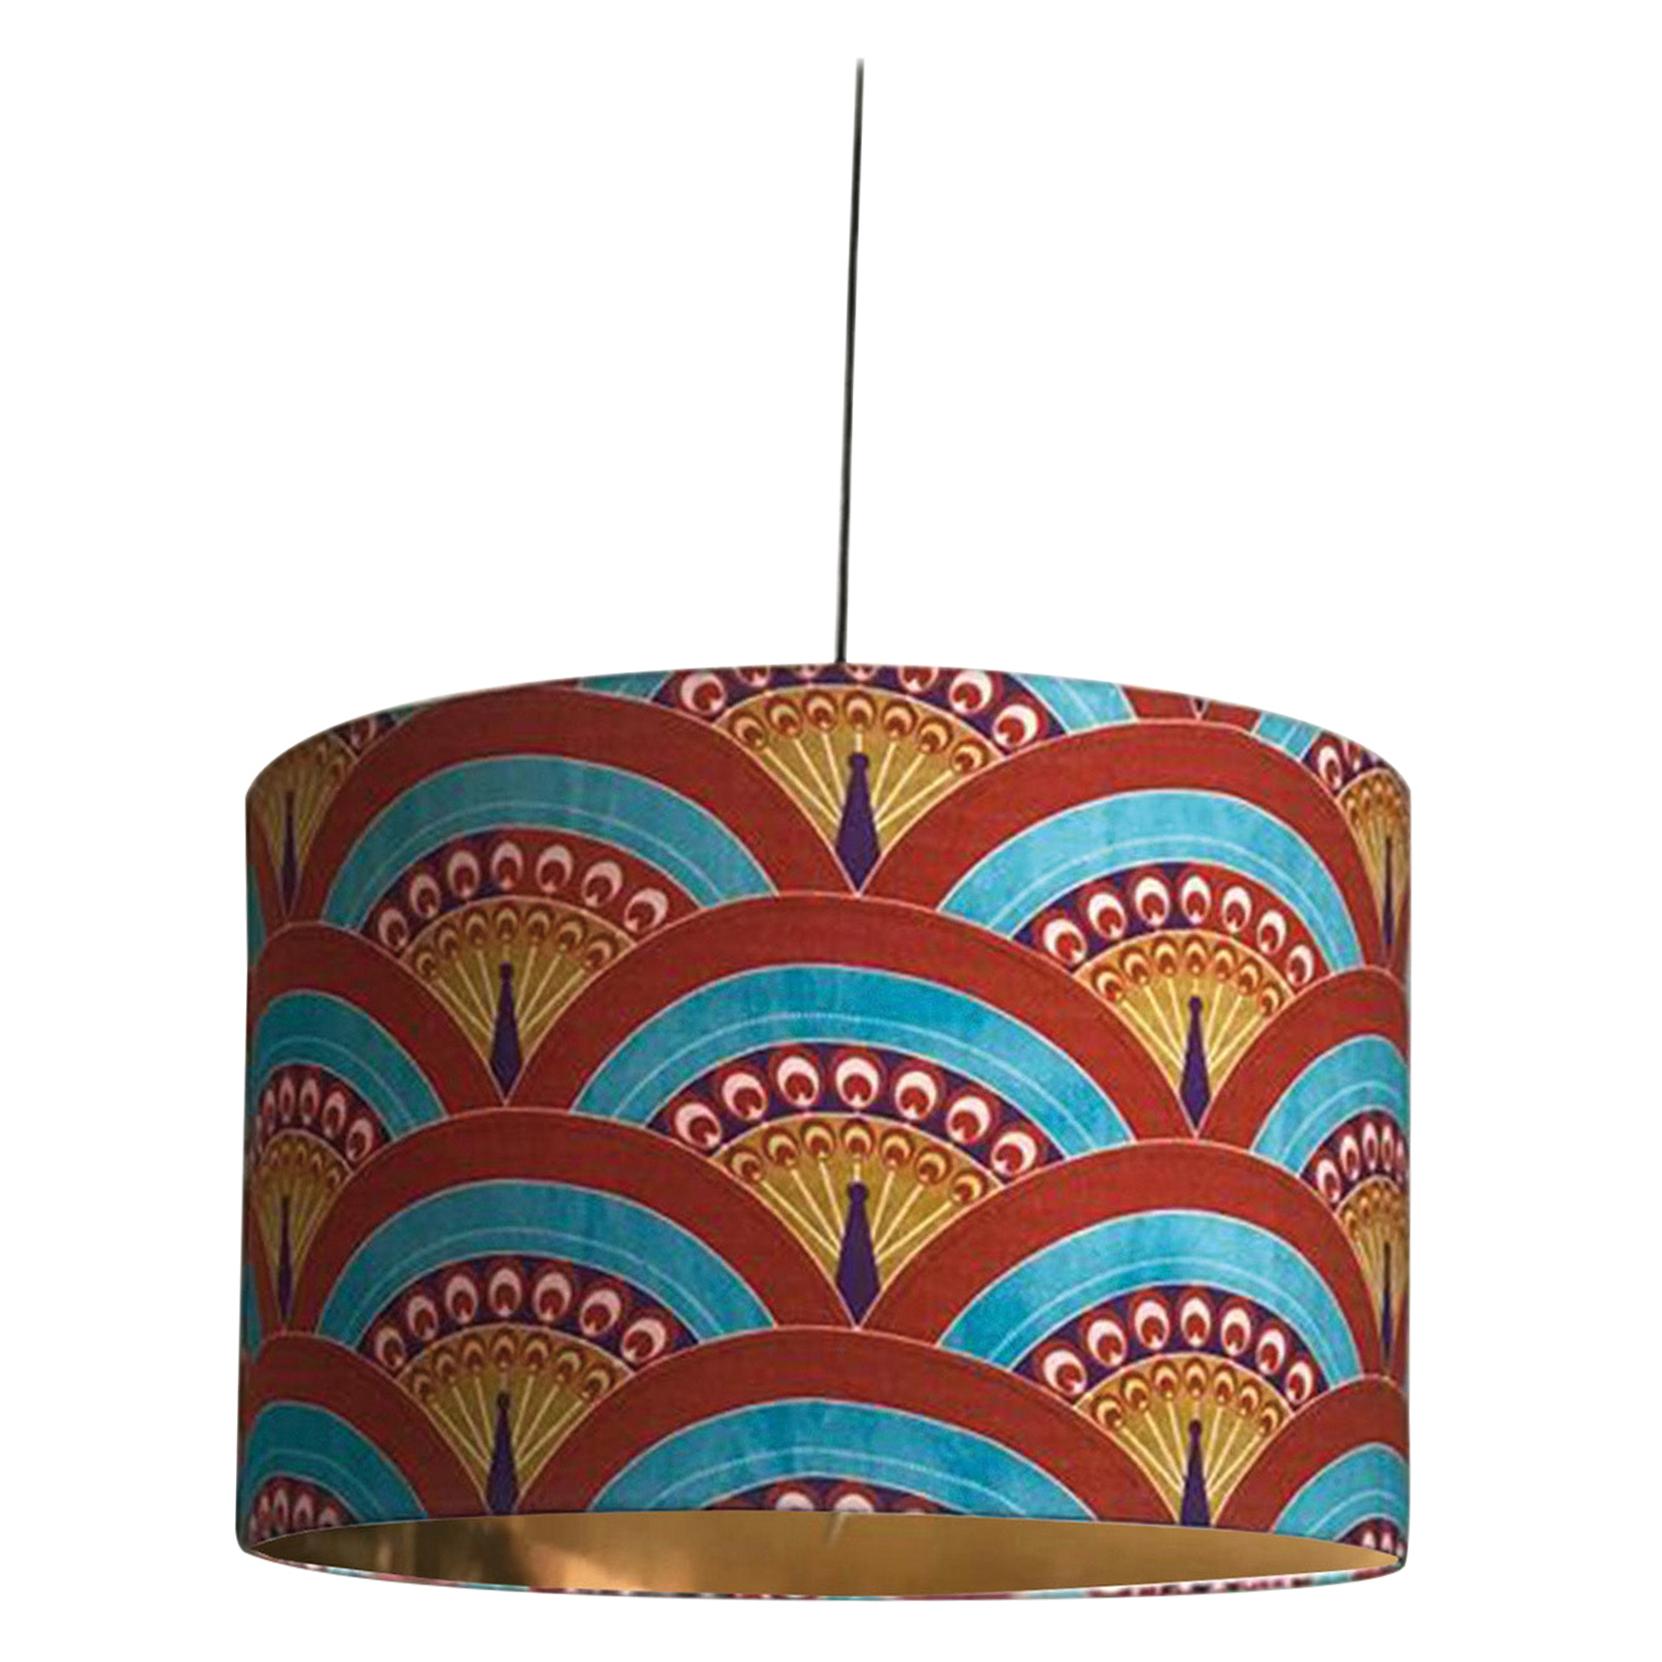 Matthew Williamson for Les-Ottomans Peacock Lampshade